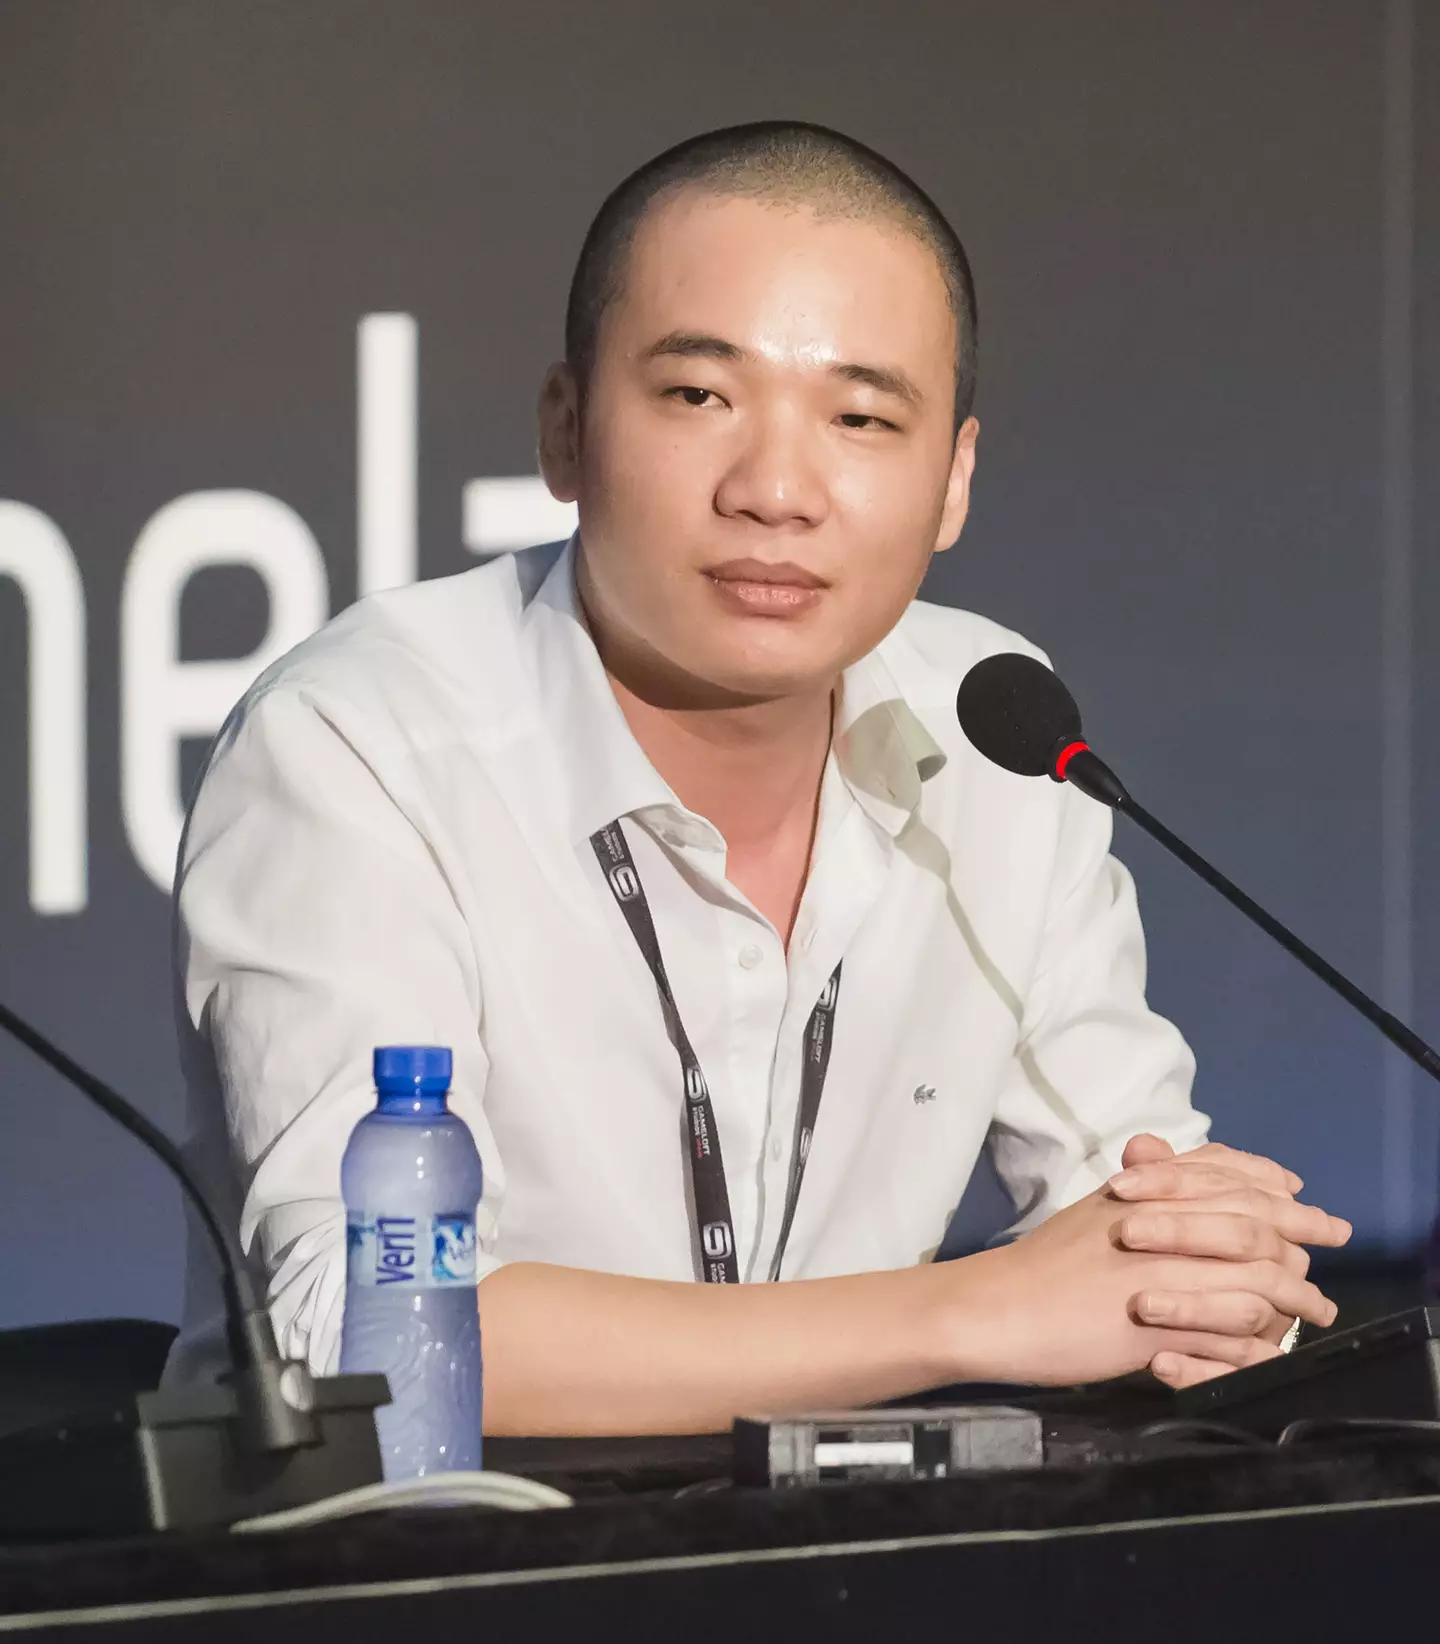 Dong Nguyen said the game had destroyed his simple life.